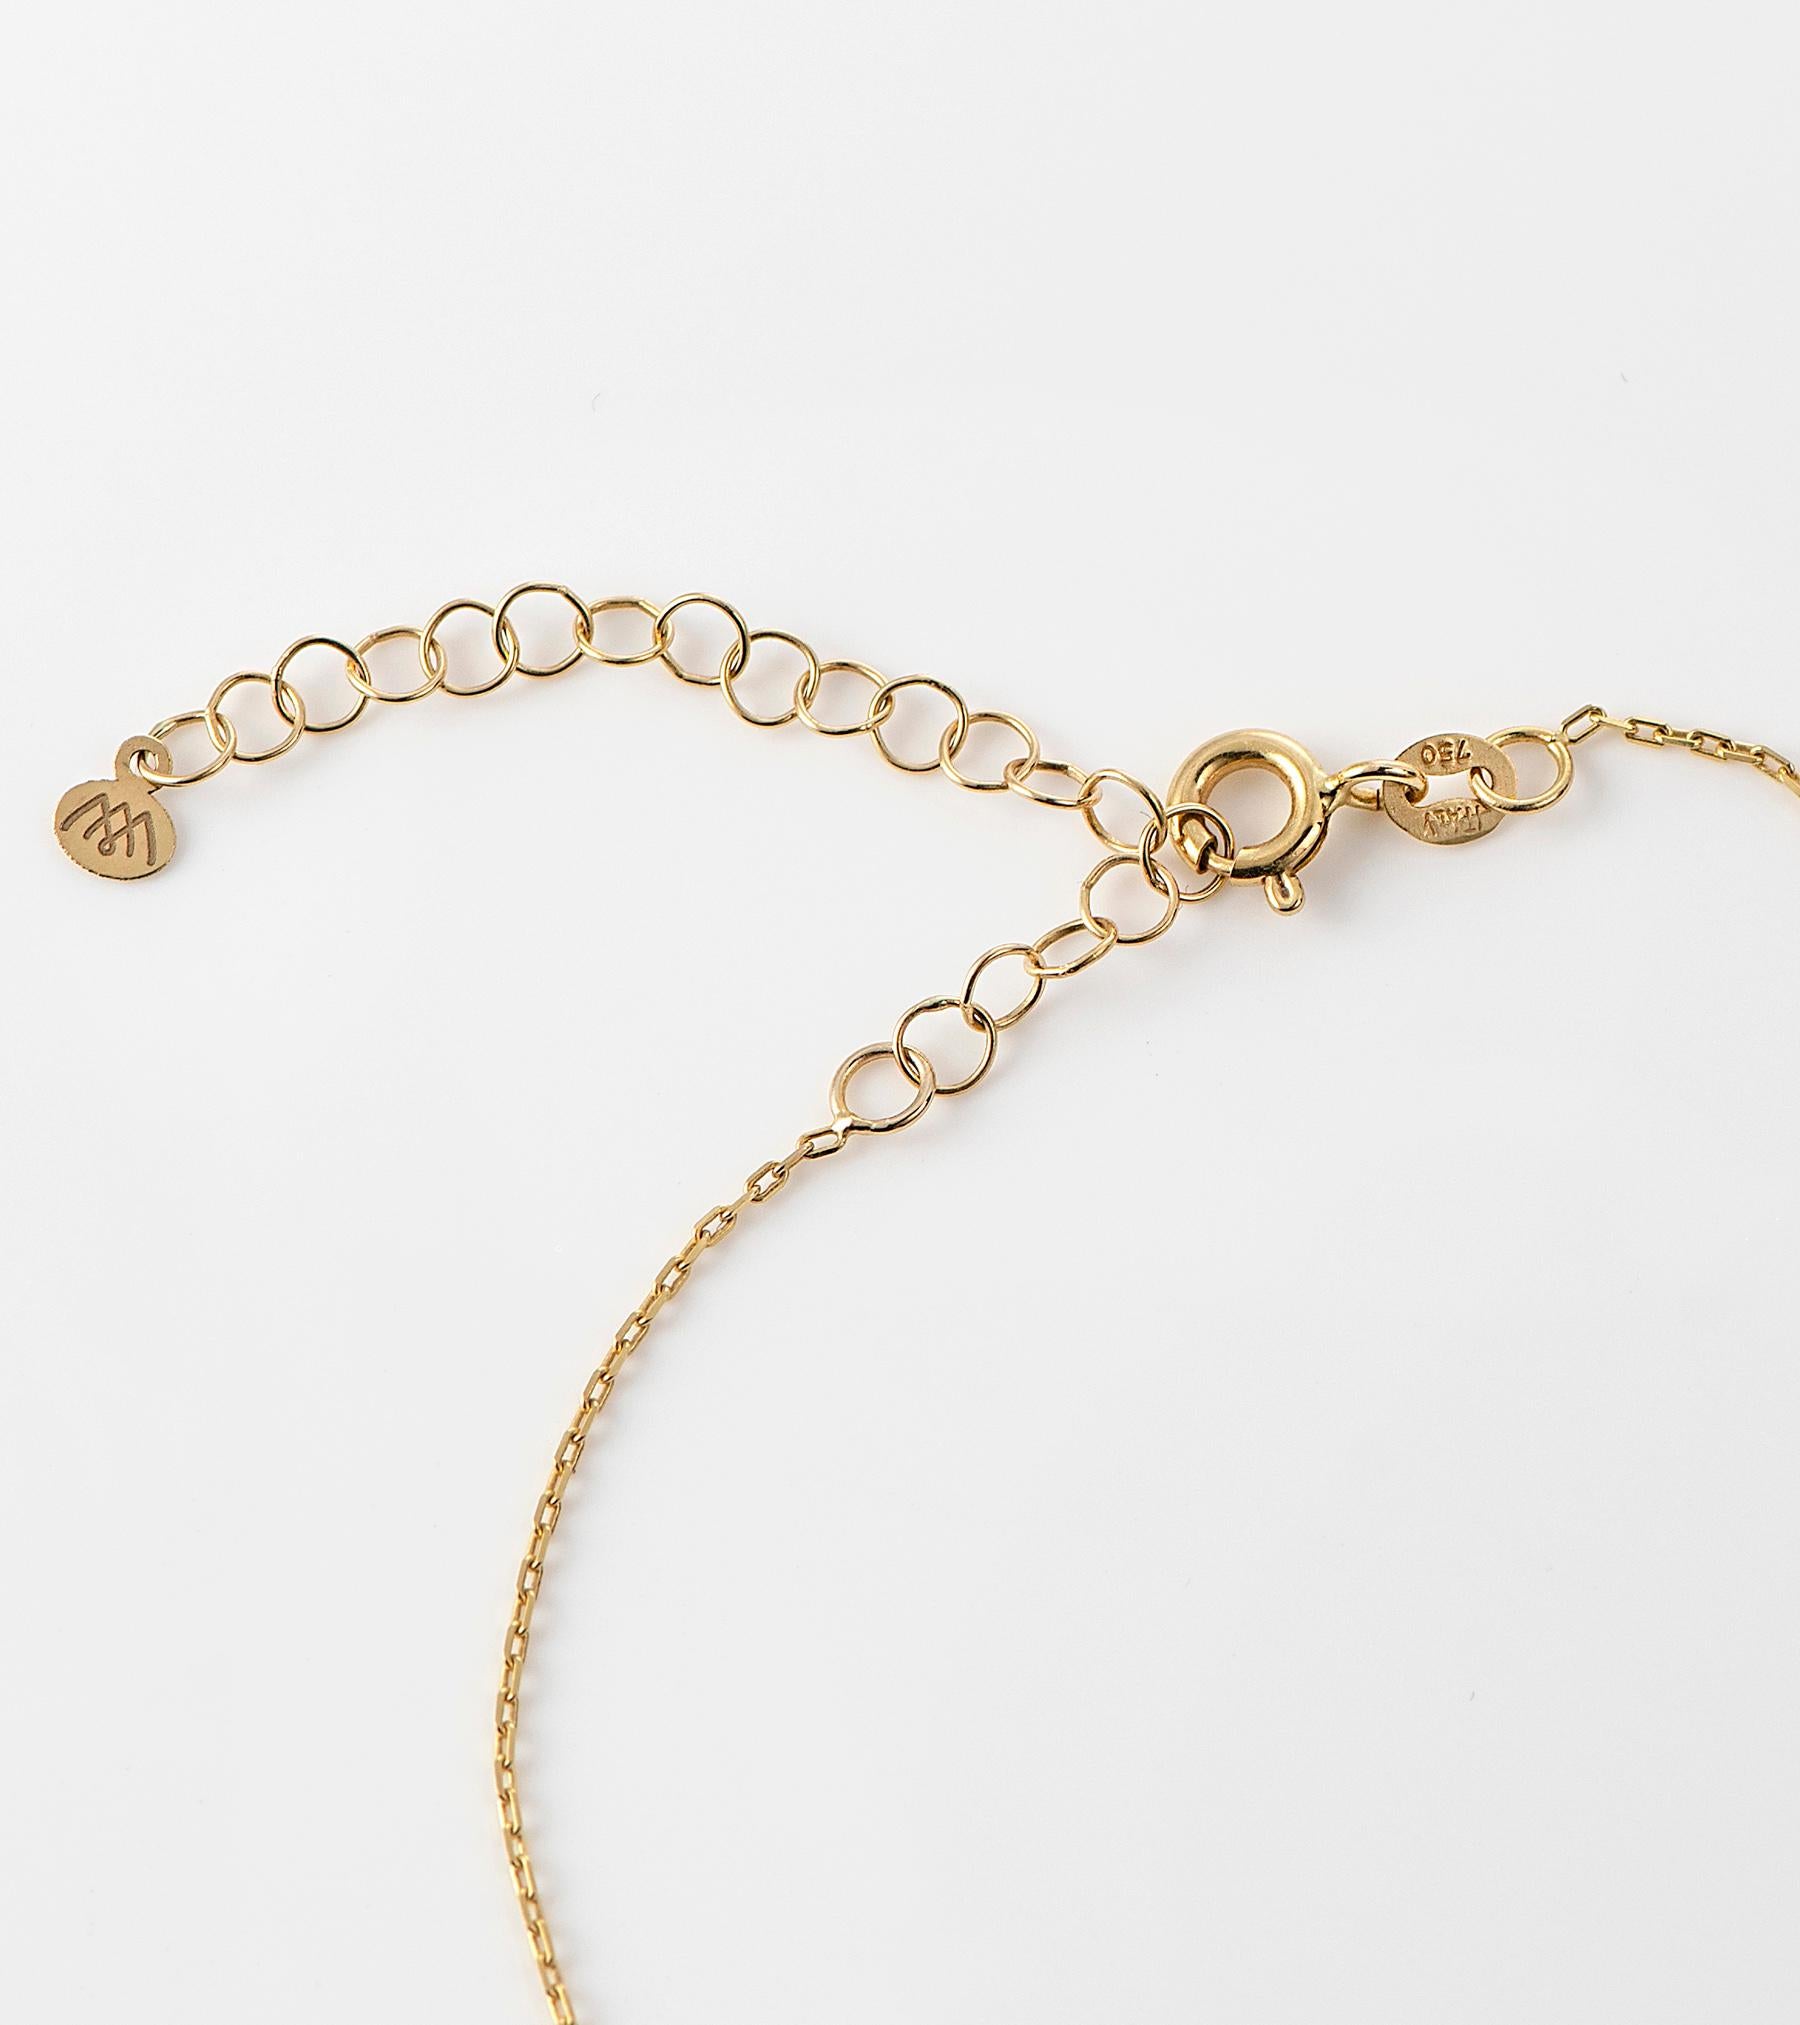 An array of dangling freshwater pearls in various sizes accentuated by glimmering natural diamonds hanging from a delicate chain fitted closely around the neck. 

A modern take on the classic pearl choker, that adds a touch of playfulness to any